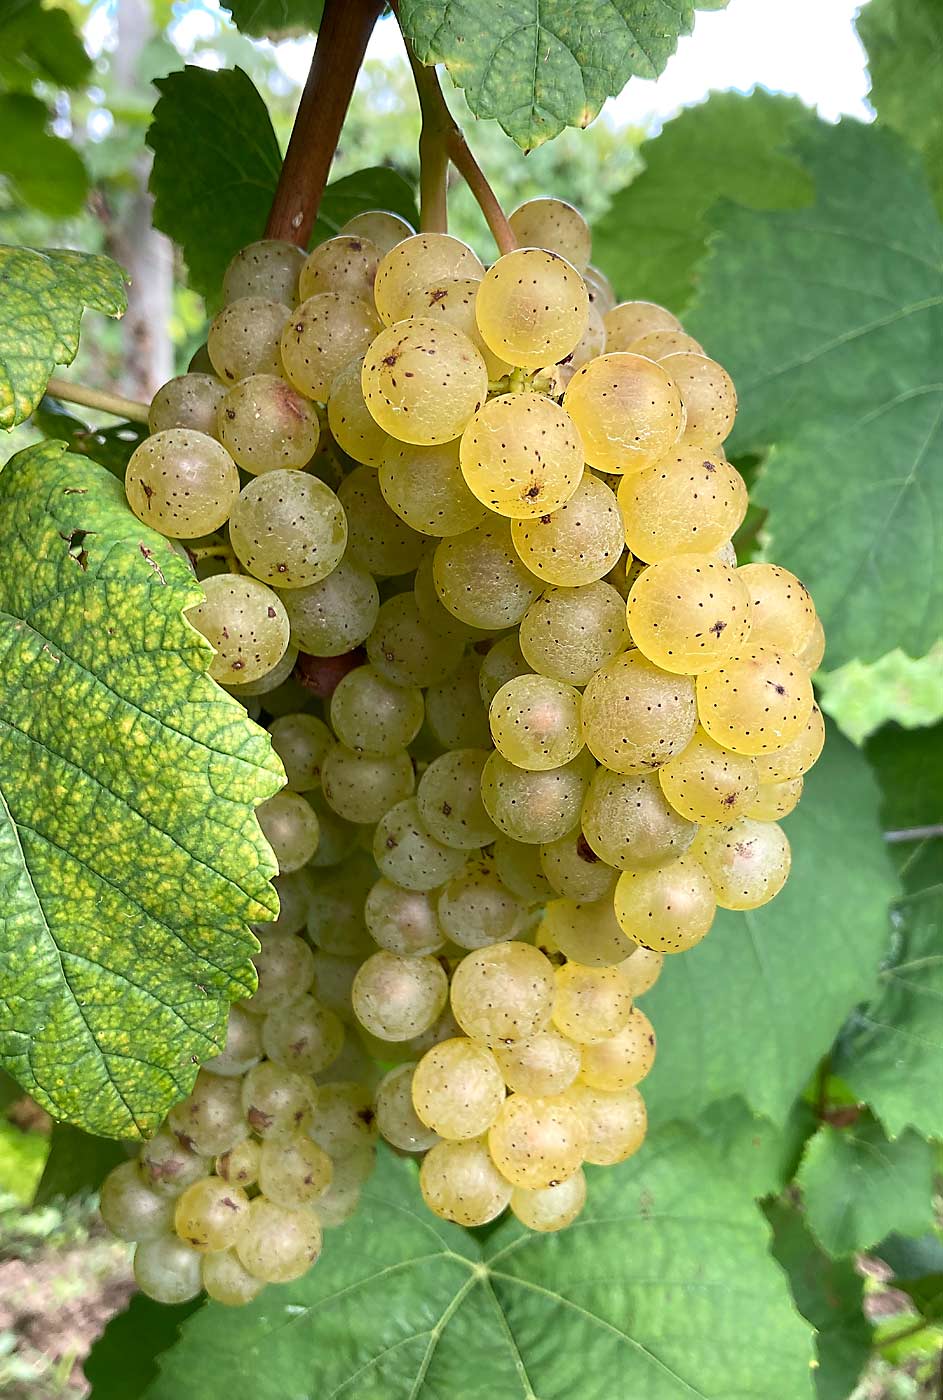 Aravelle is the latest release from Cornell University’s grape breeding program. The white wine grape’s fruit quality is similar to Riesling, one of its parents, but it’s more resistant to botrytis bunch rot, powdery mildew and downy mildew, said grape breeder Bruce Reisch. (Courtesy Bruce Reisch/Cornell University)